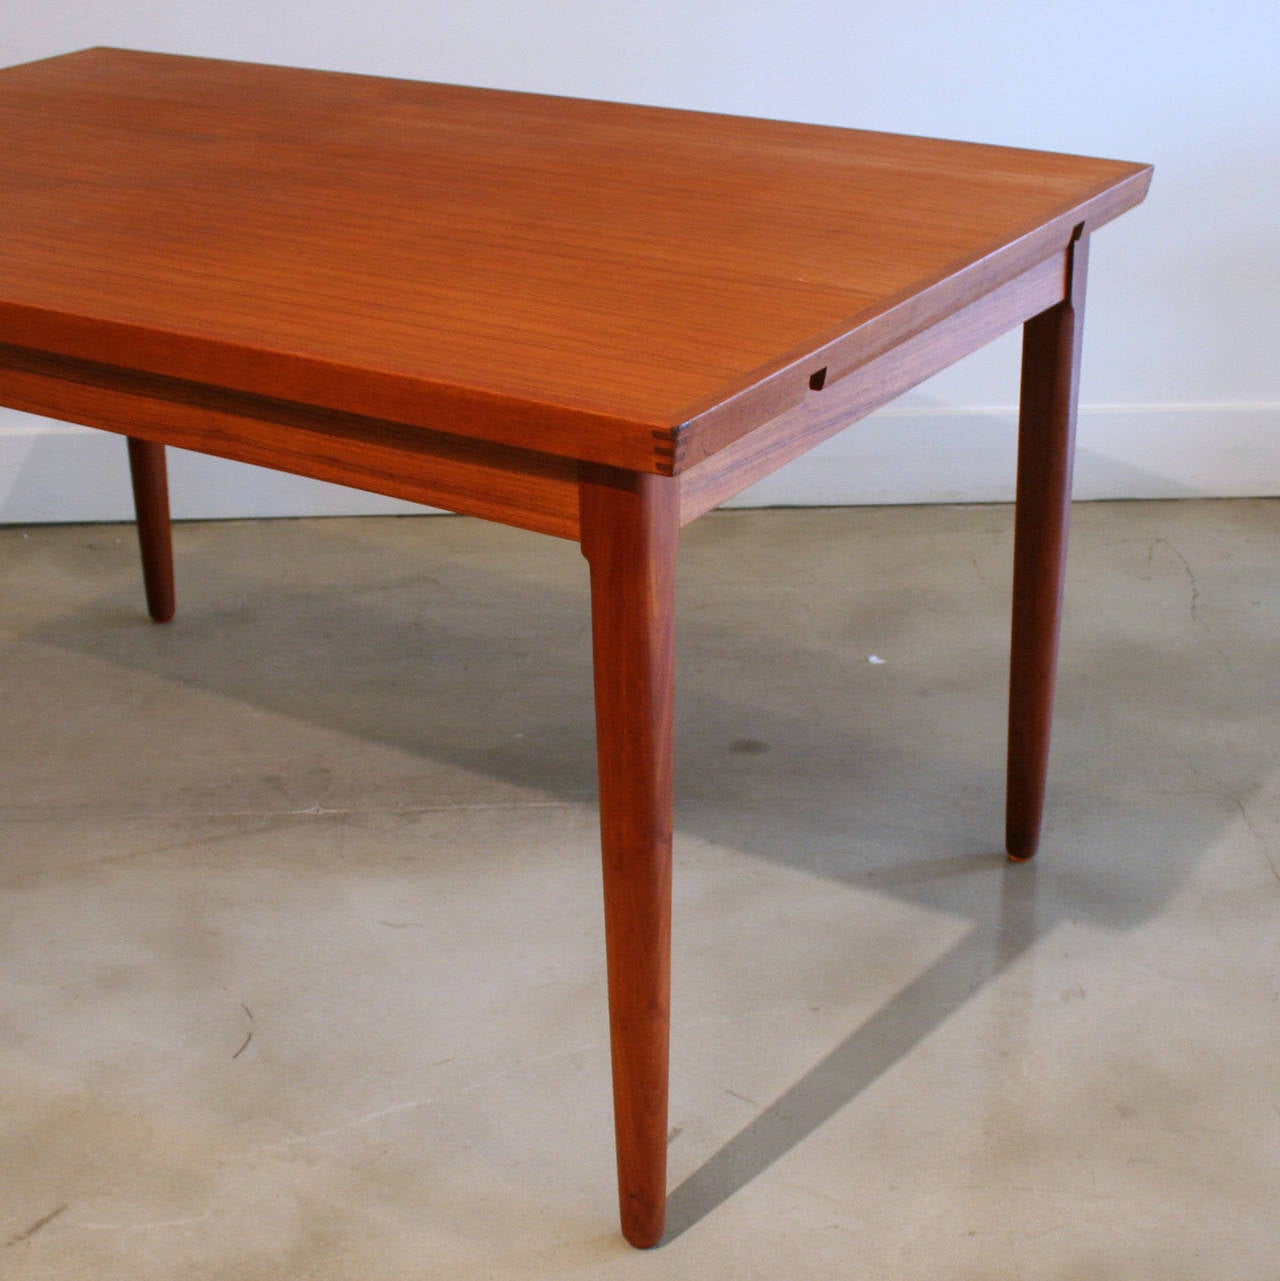 Stunning small scale teak dining table with two hidden leaves. Easy to extend drawer leaves hid under the beveled lip of the table top. Dovetail detailing at the corners. Resting on solid teak legs. Made in Denmark.